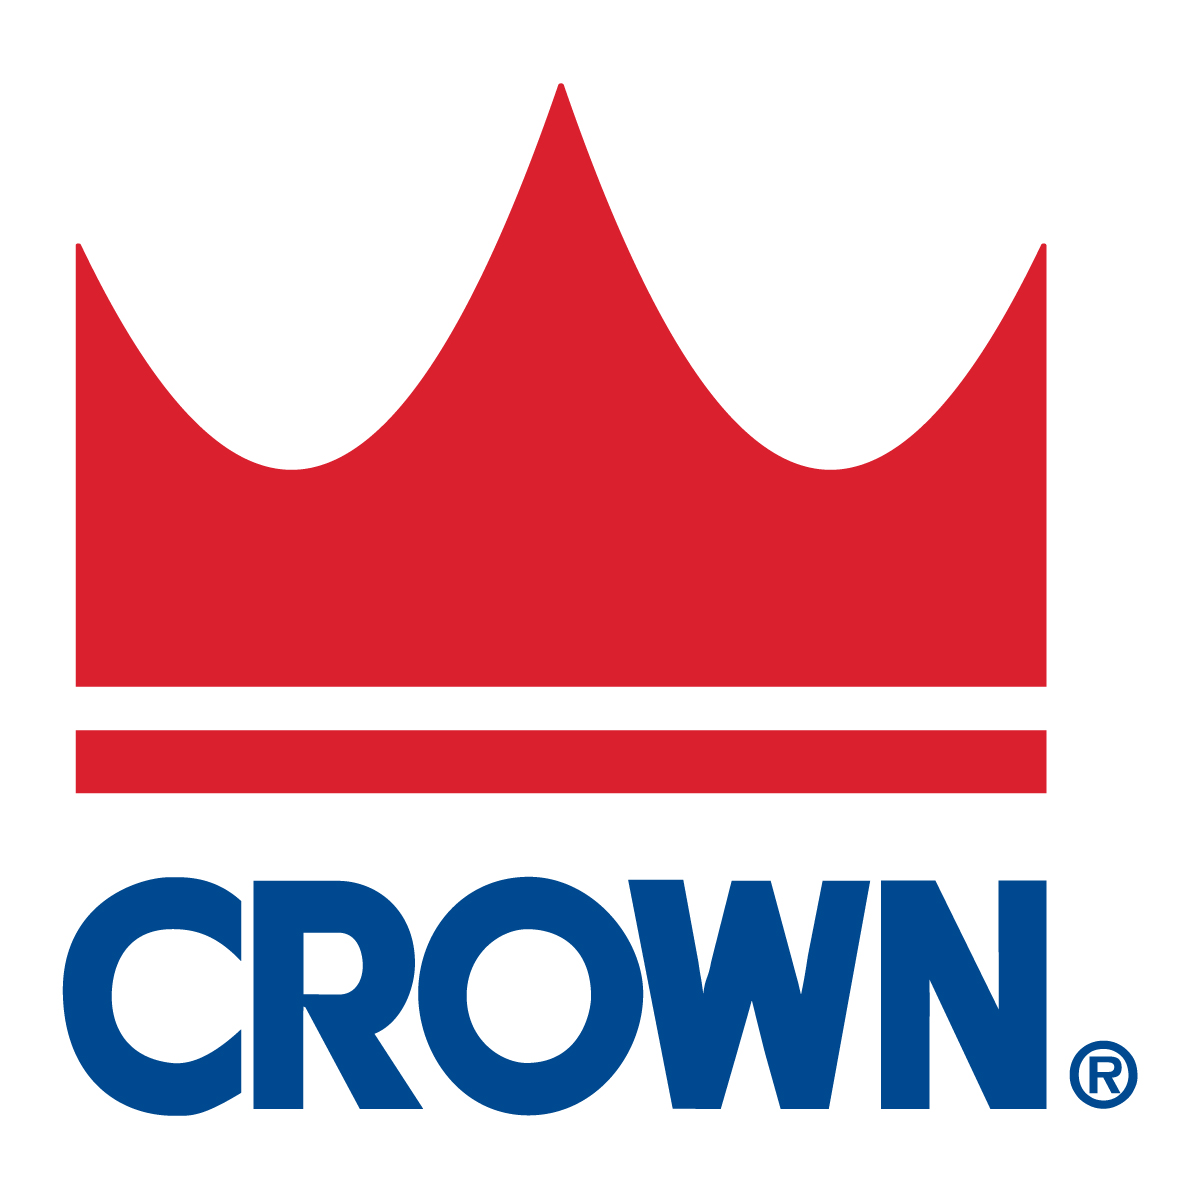 Business logo with a red crown and Crown in blue text beneath the crown